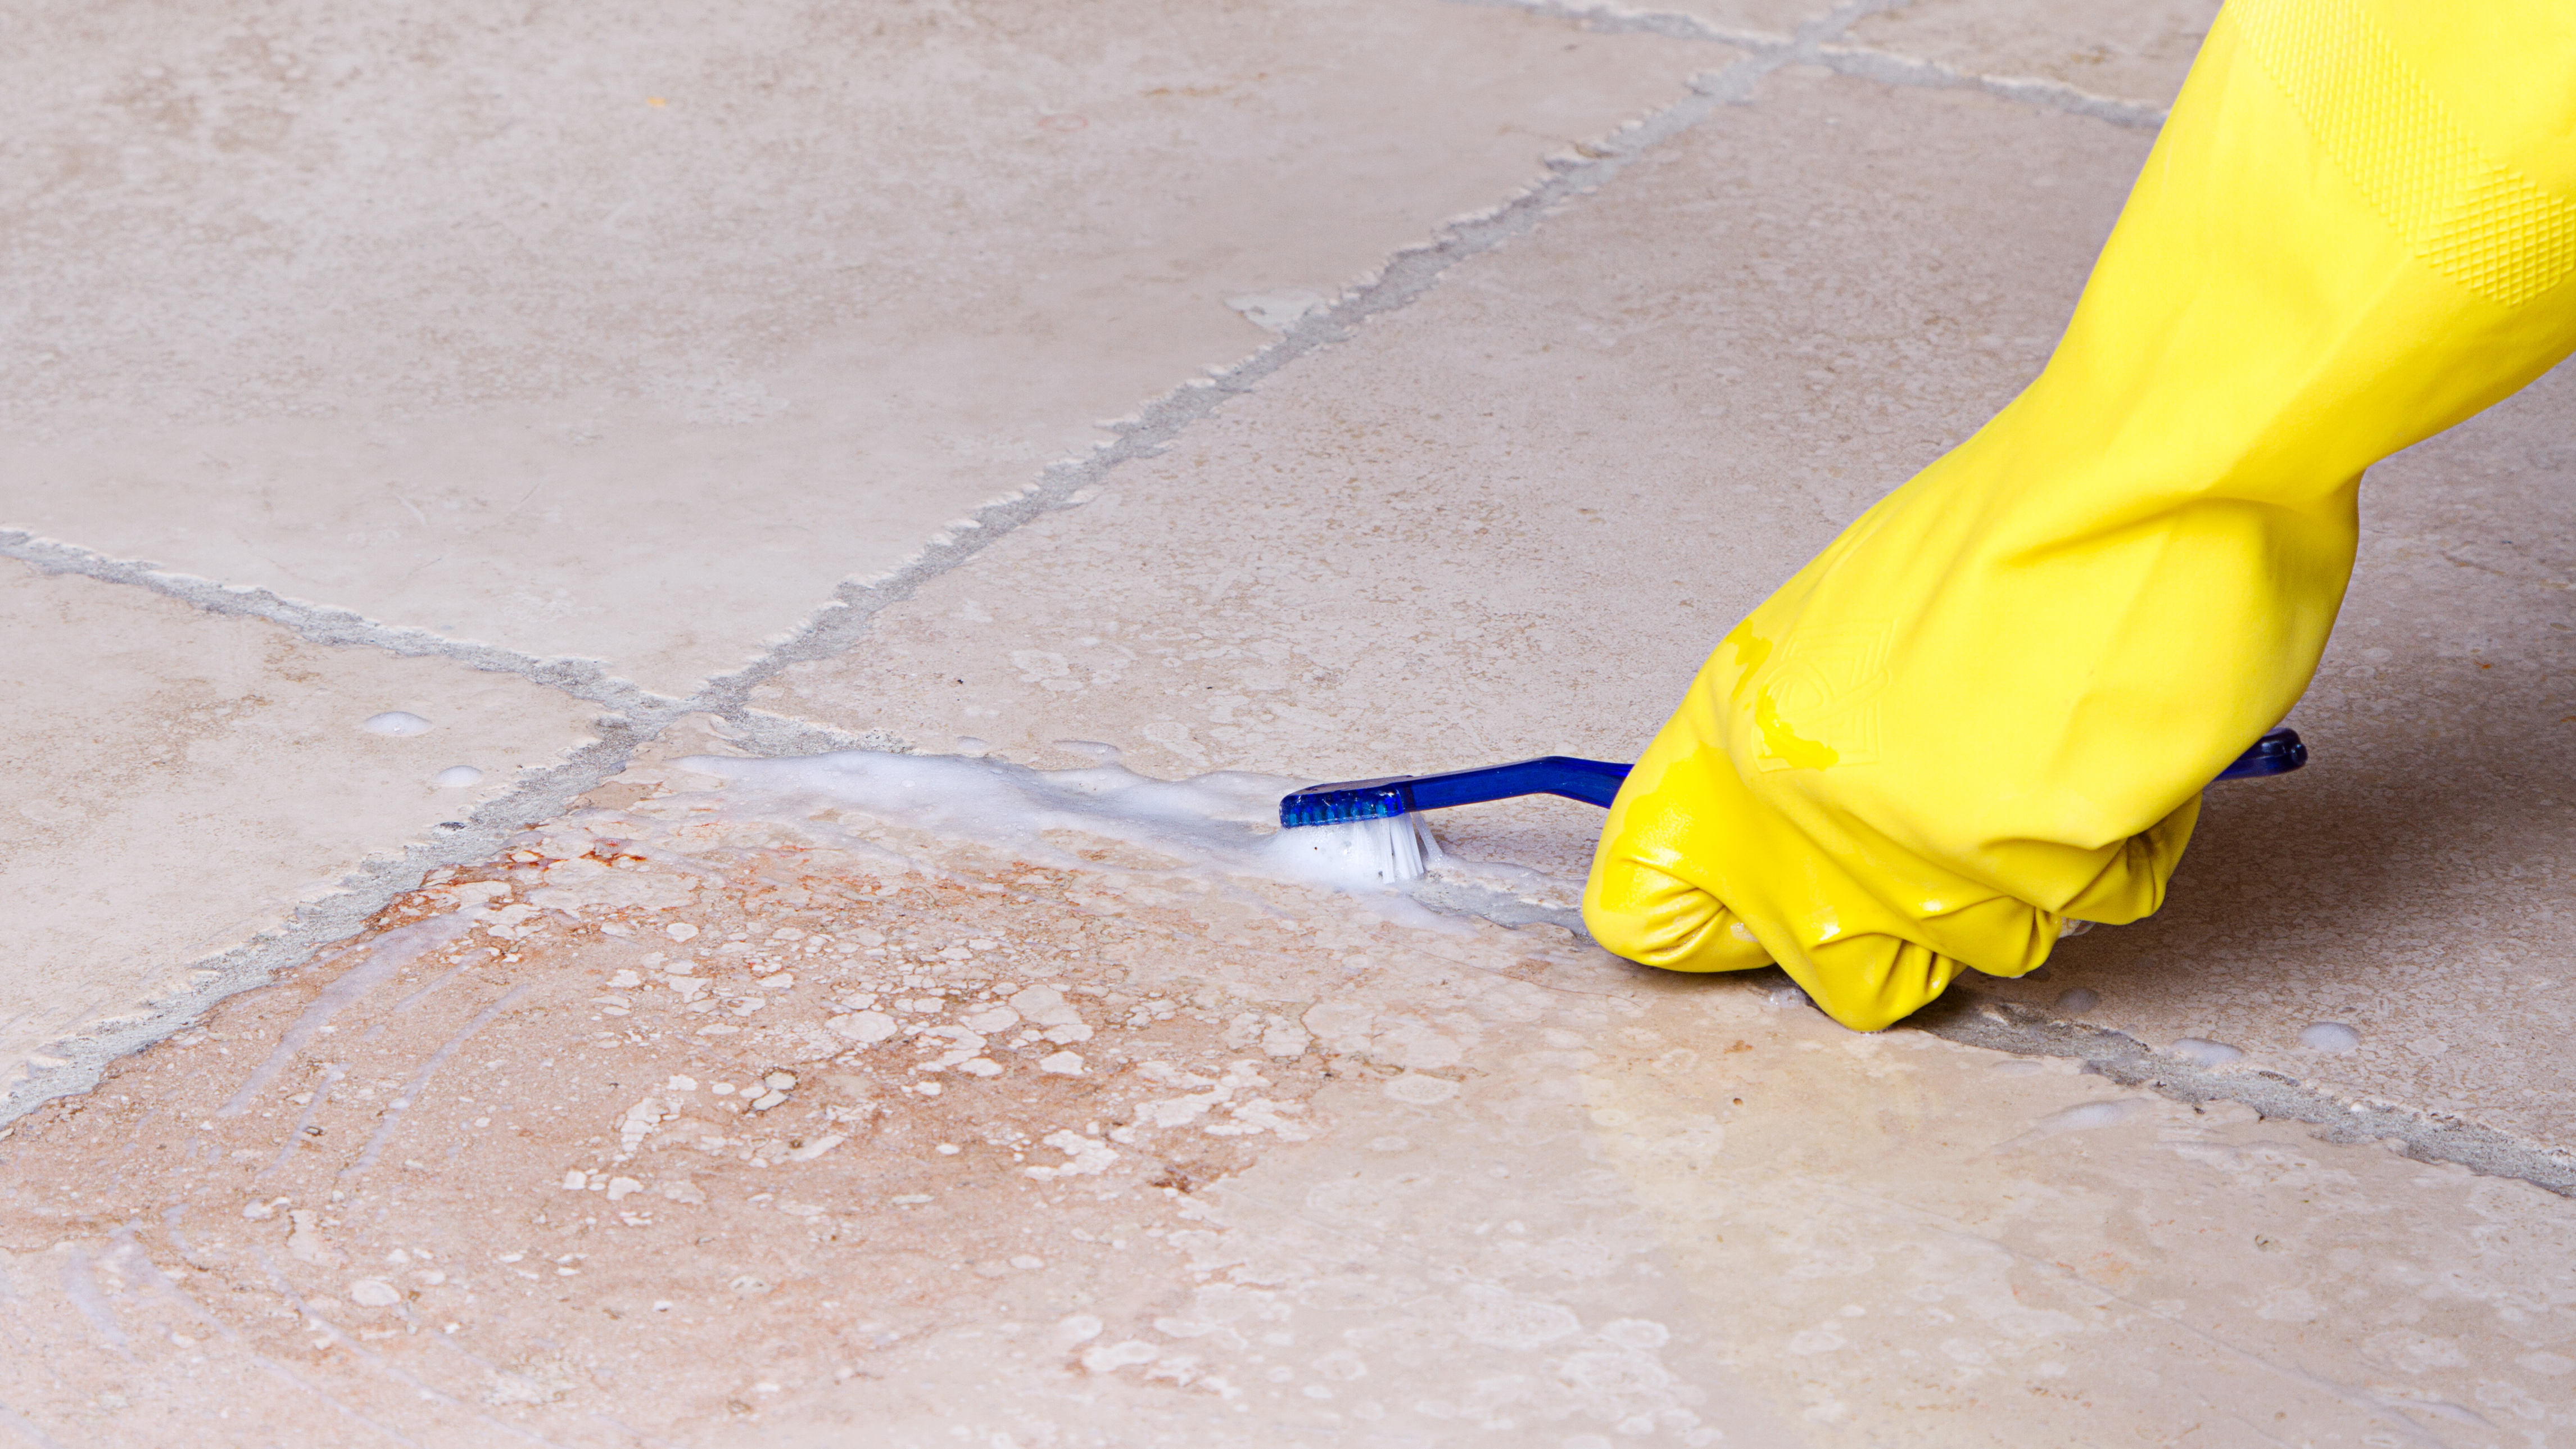 How To Clean Grout On Floor Tiles, Best Way To Clean Ceramic Tile Floors And Grout